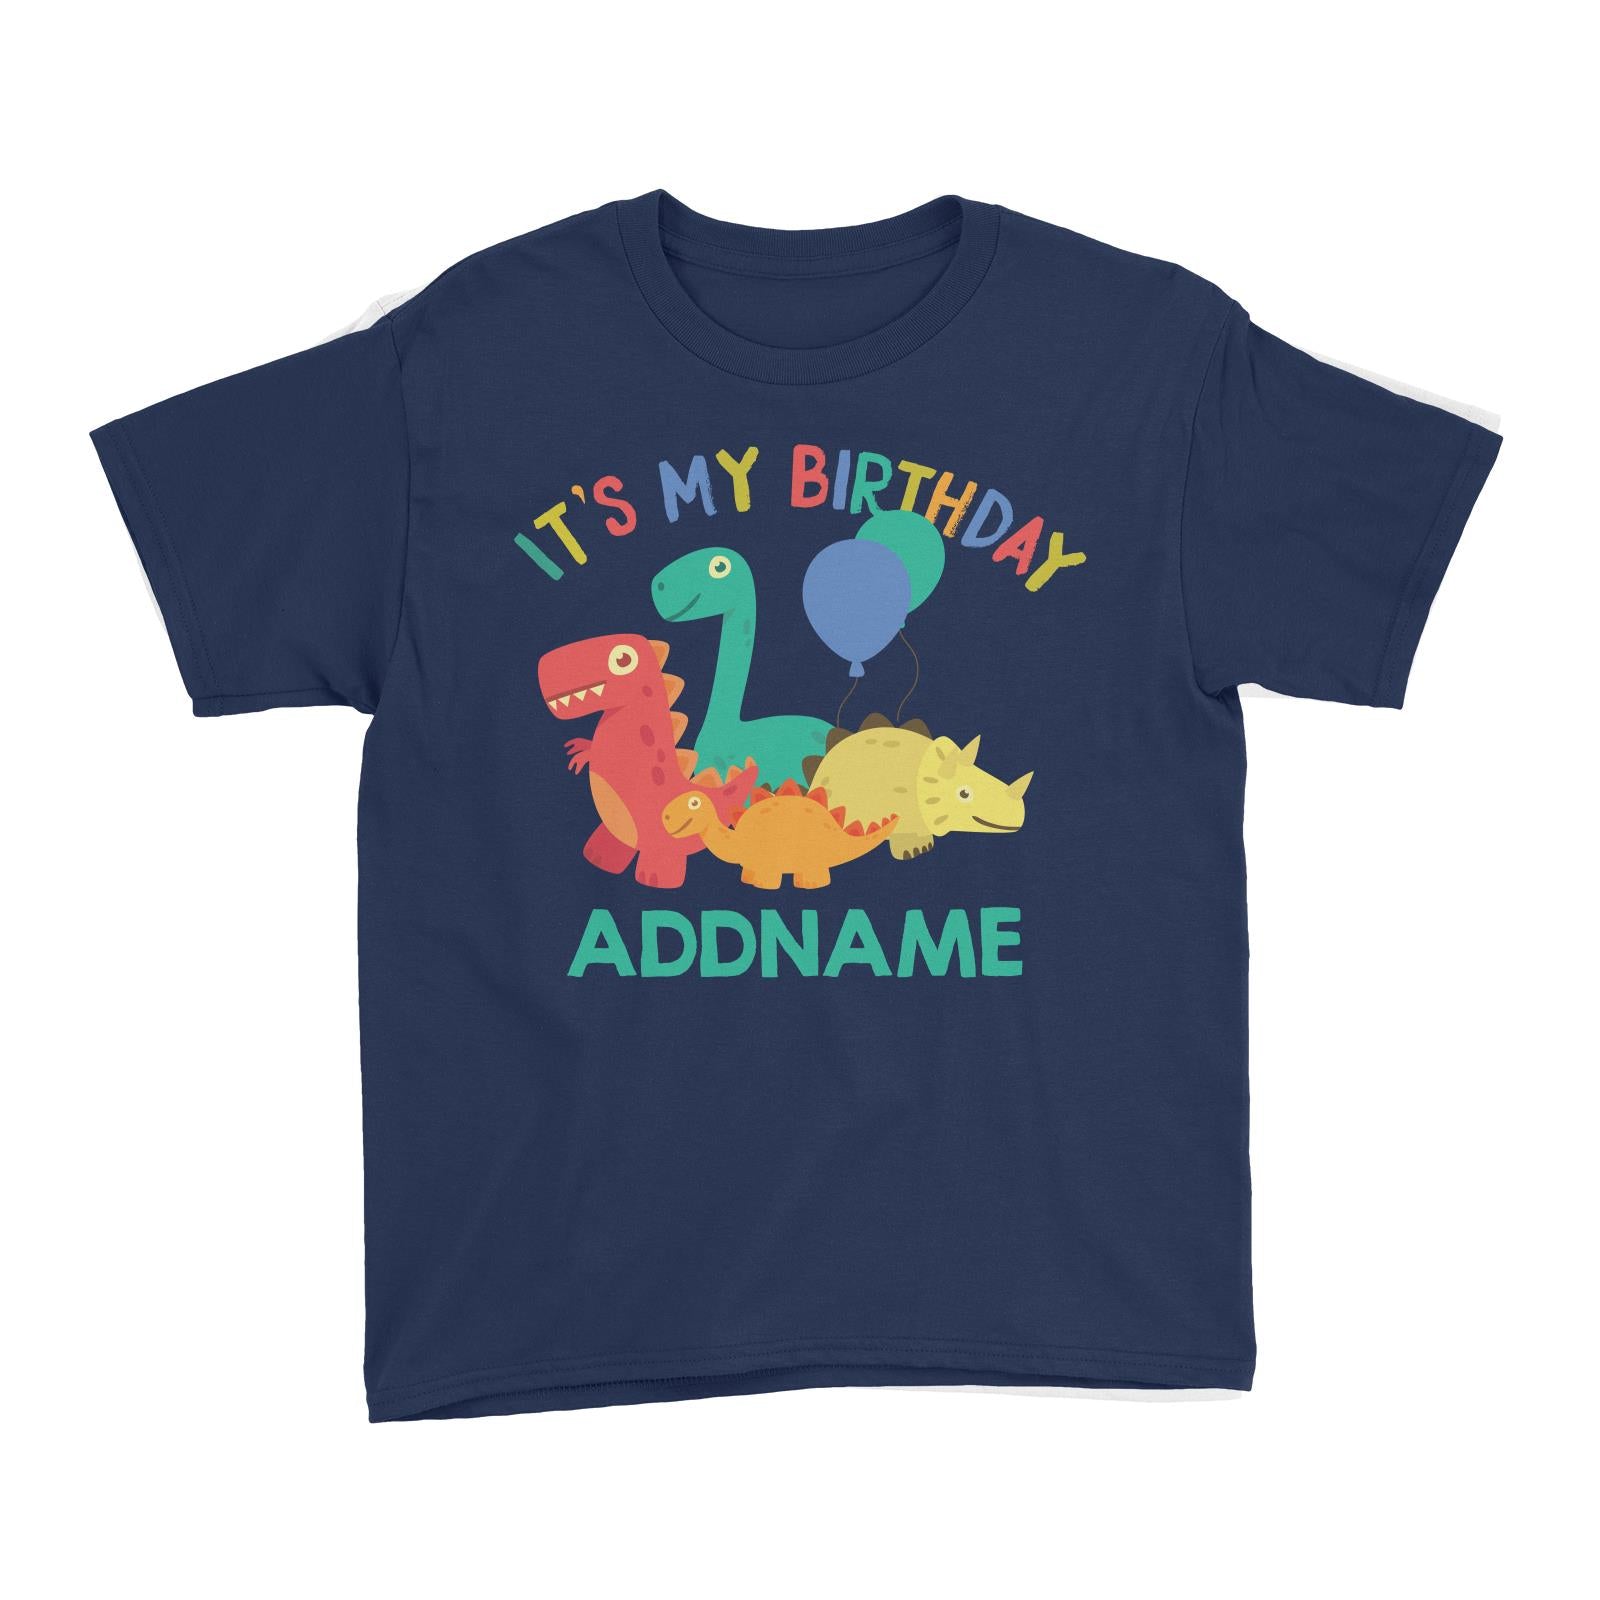 It's My Birthday Addname with Cute Dinosaurs and Balloons Birthday Theme Kid's T-Shirt